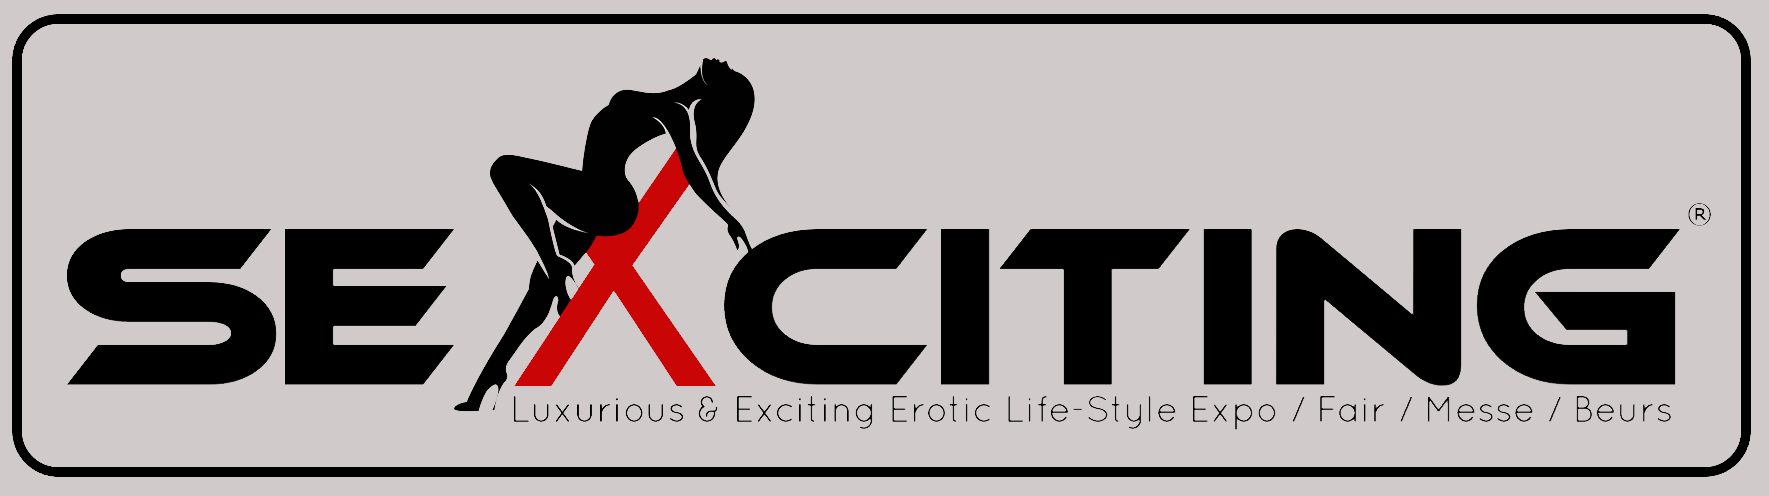 Luxurious & Exciting Erotic Life-Style